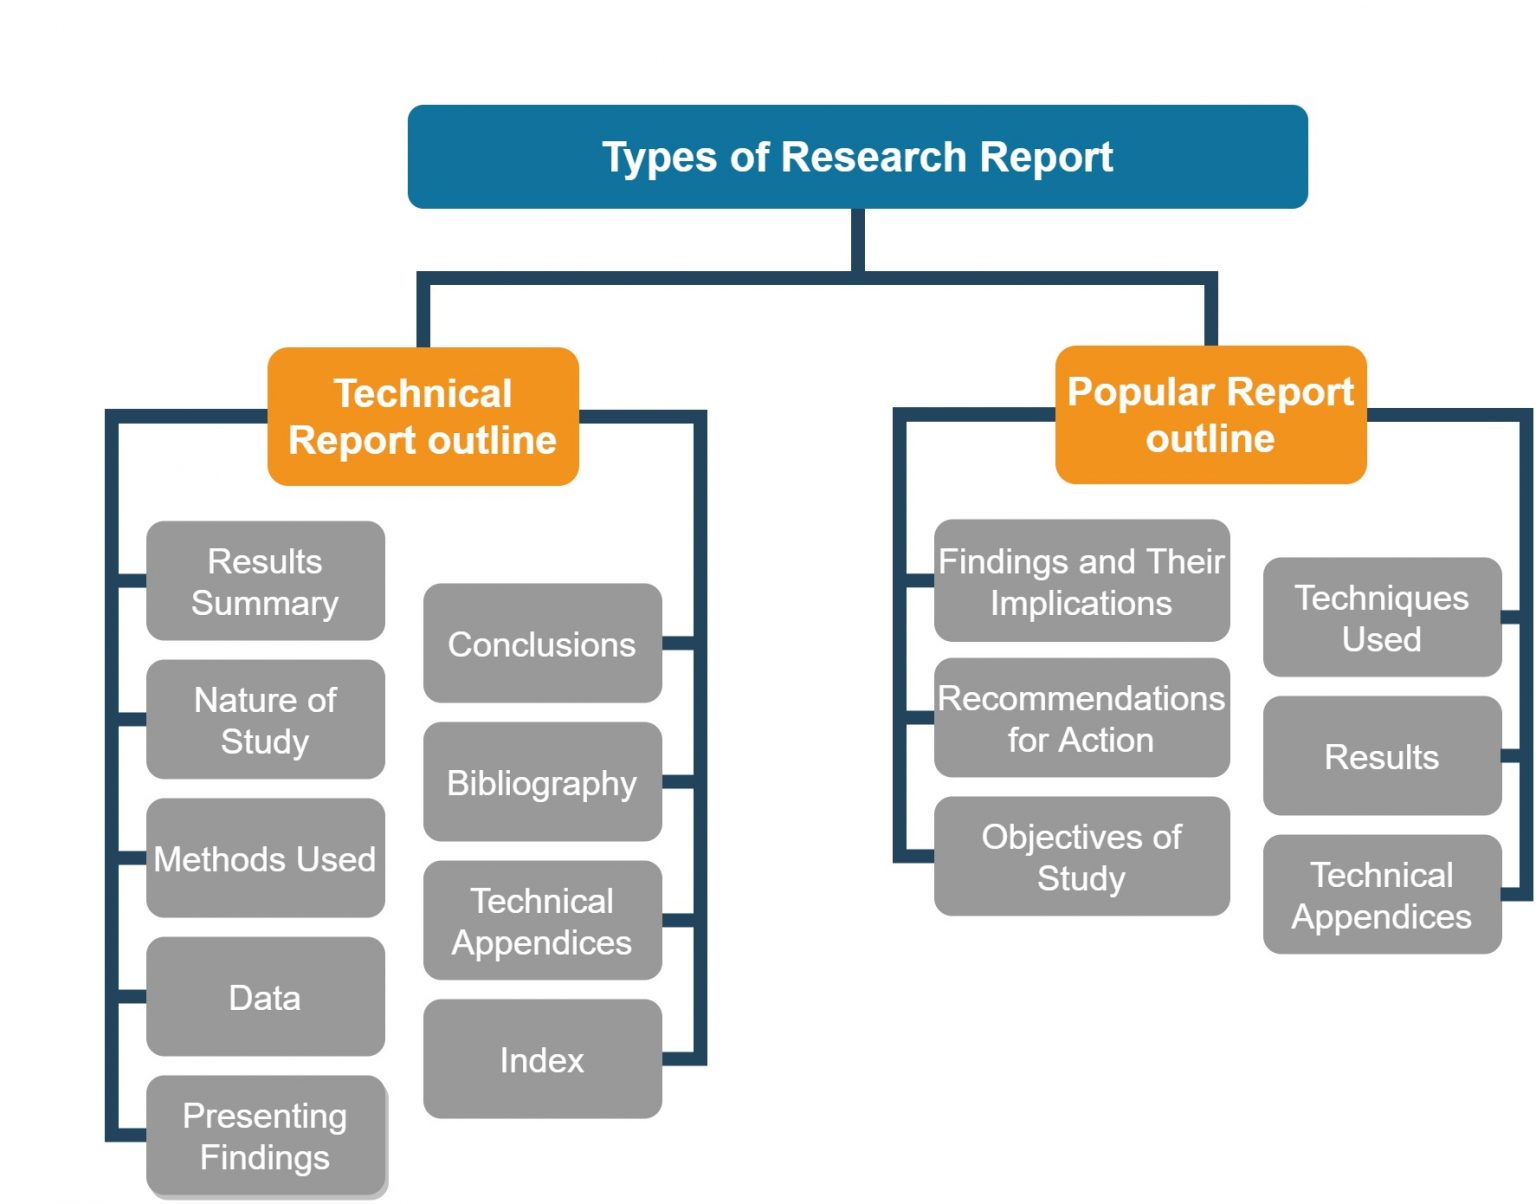 what is a report means